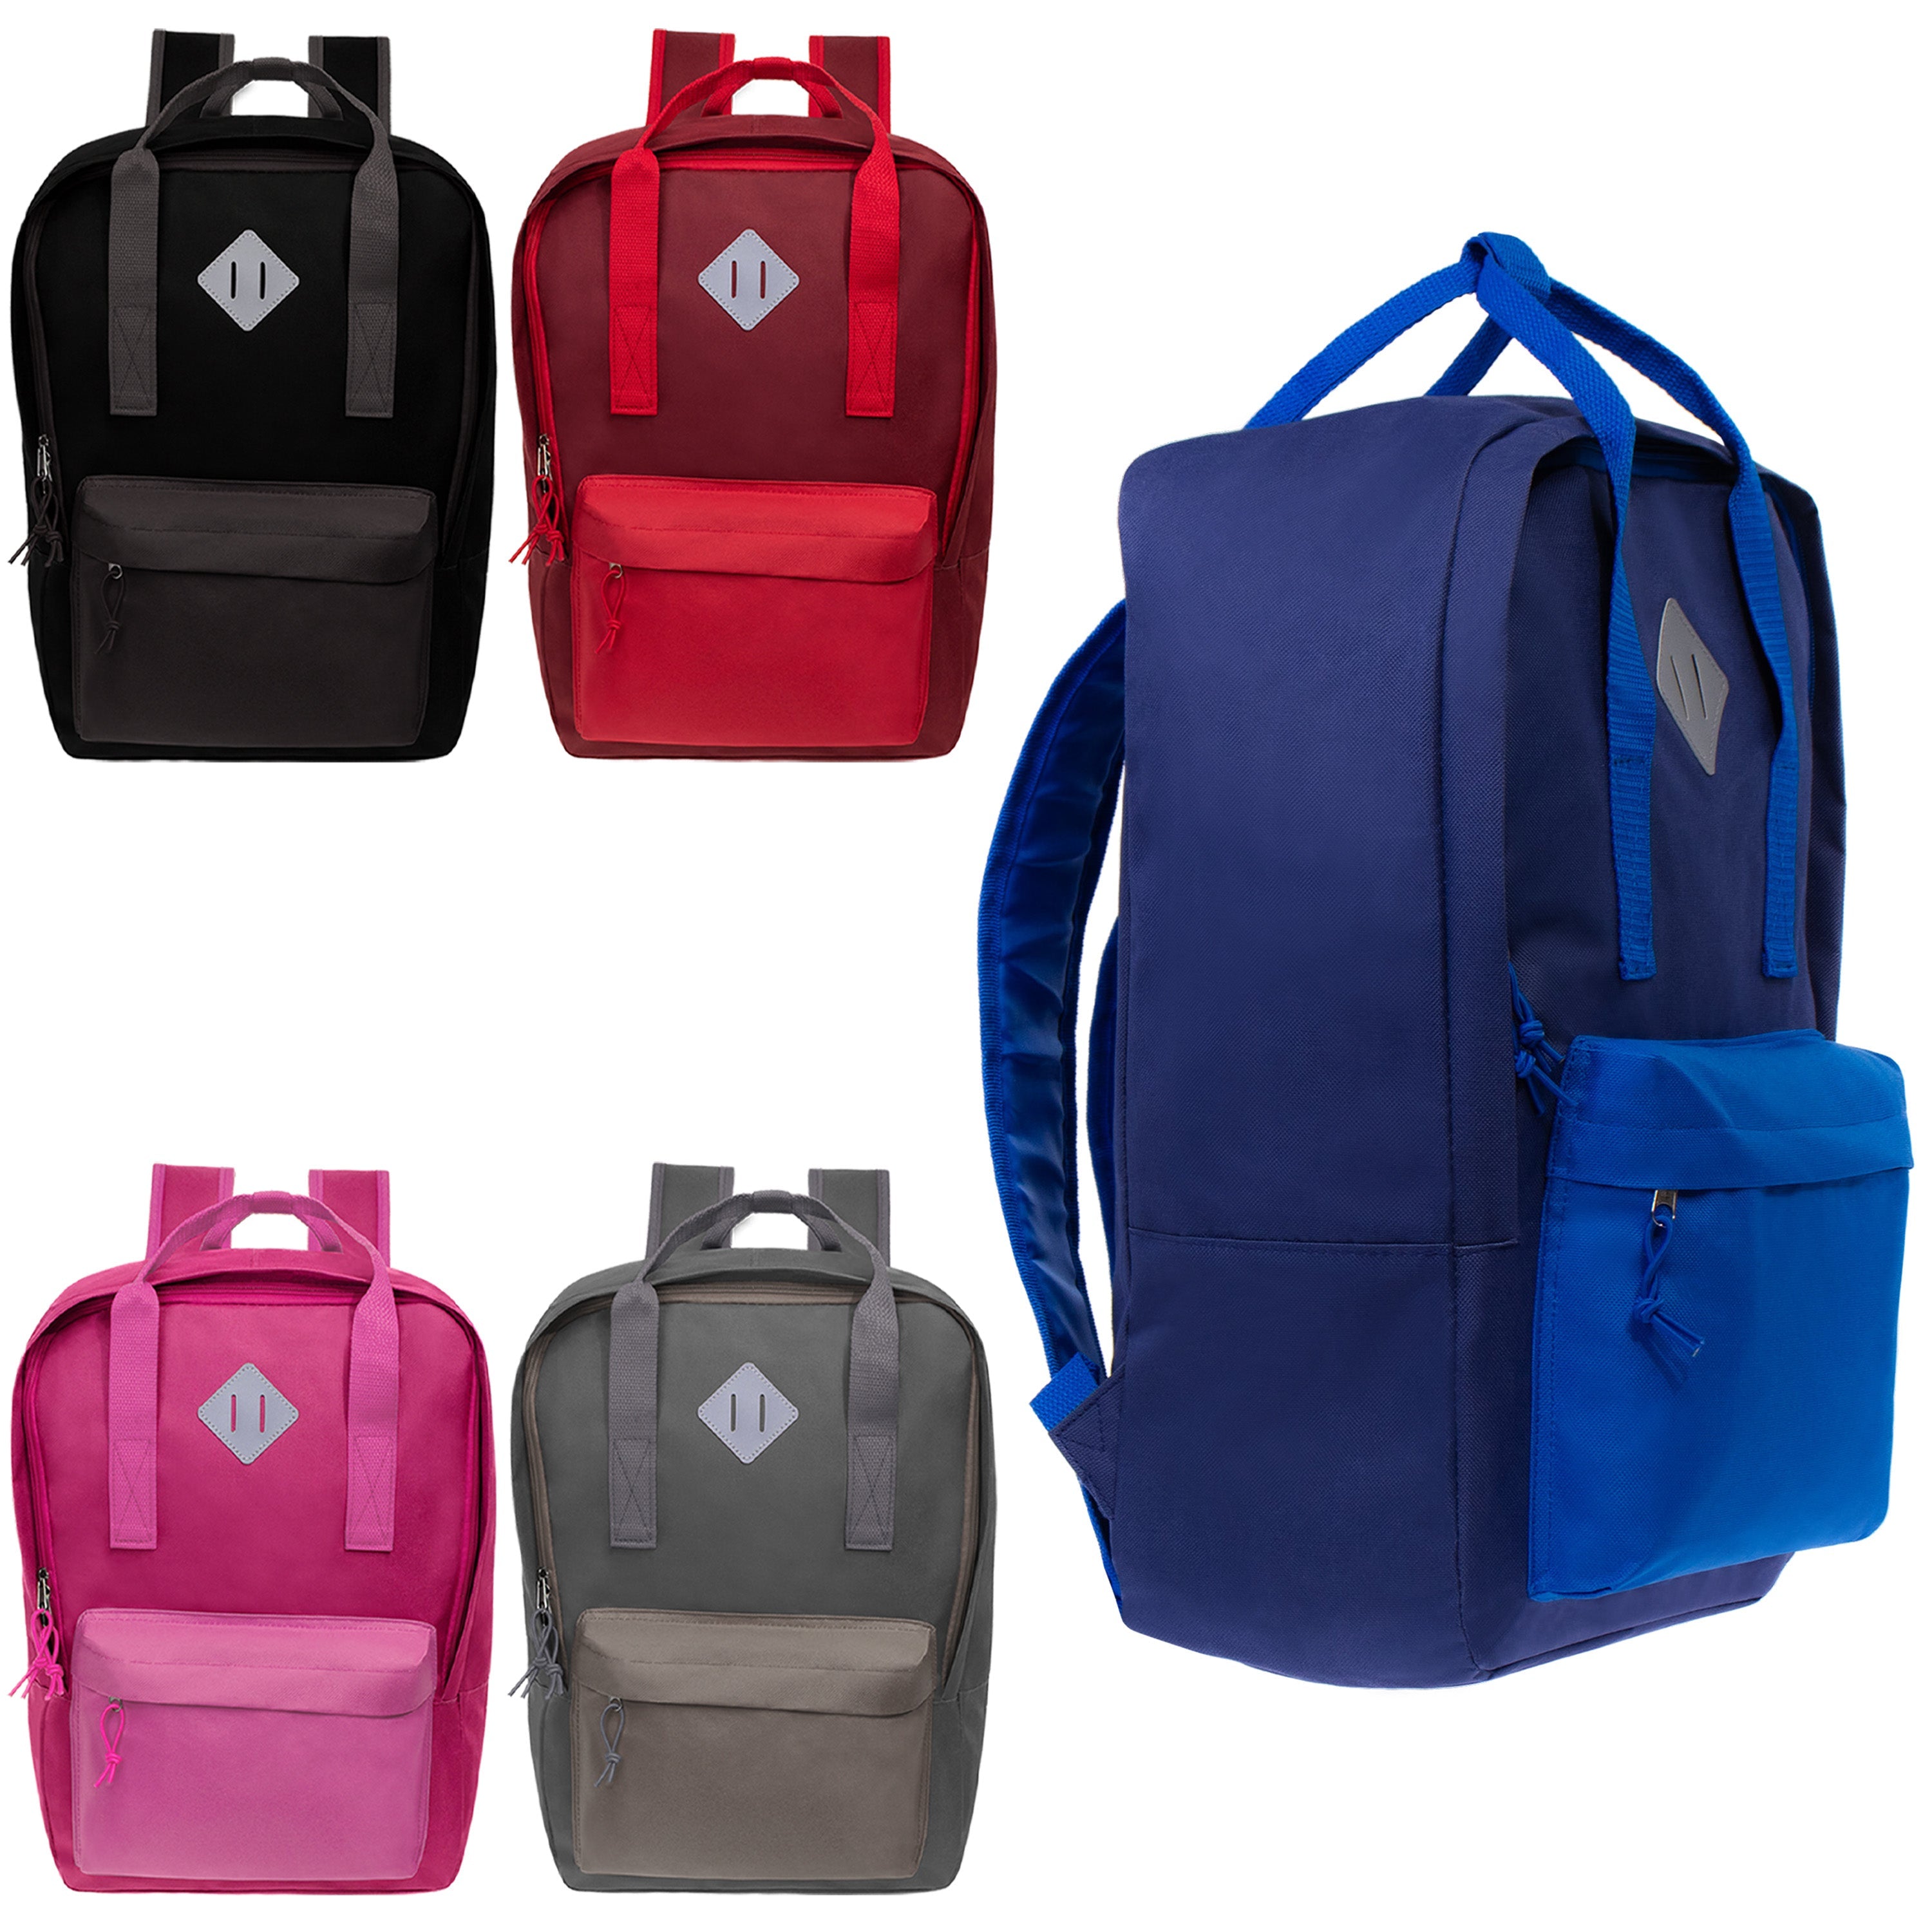 12 Multi Color Diamond Patch 17" Wholesale Backpacks and 12 Bulk School Supply Kits of Your Choice